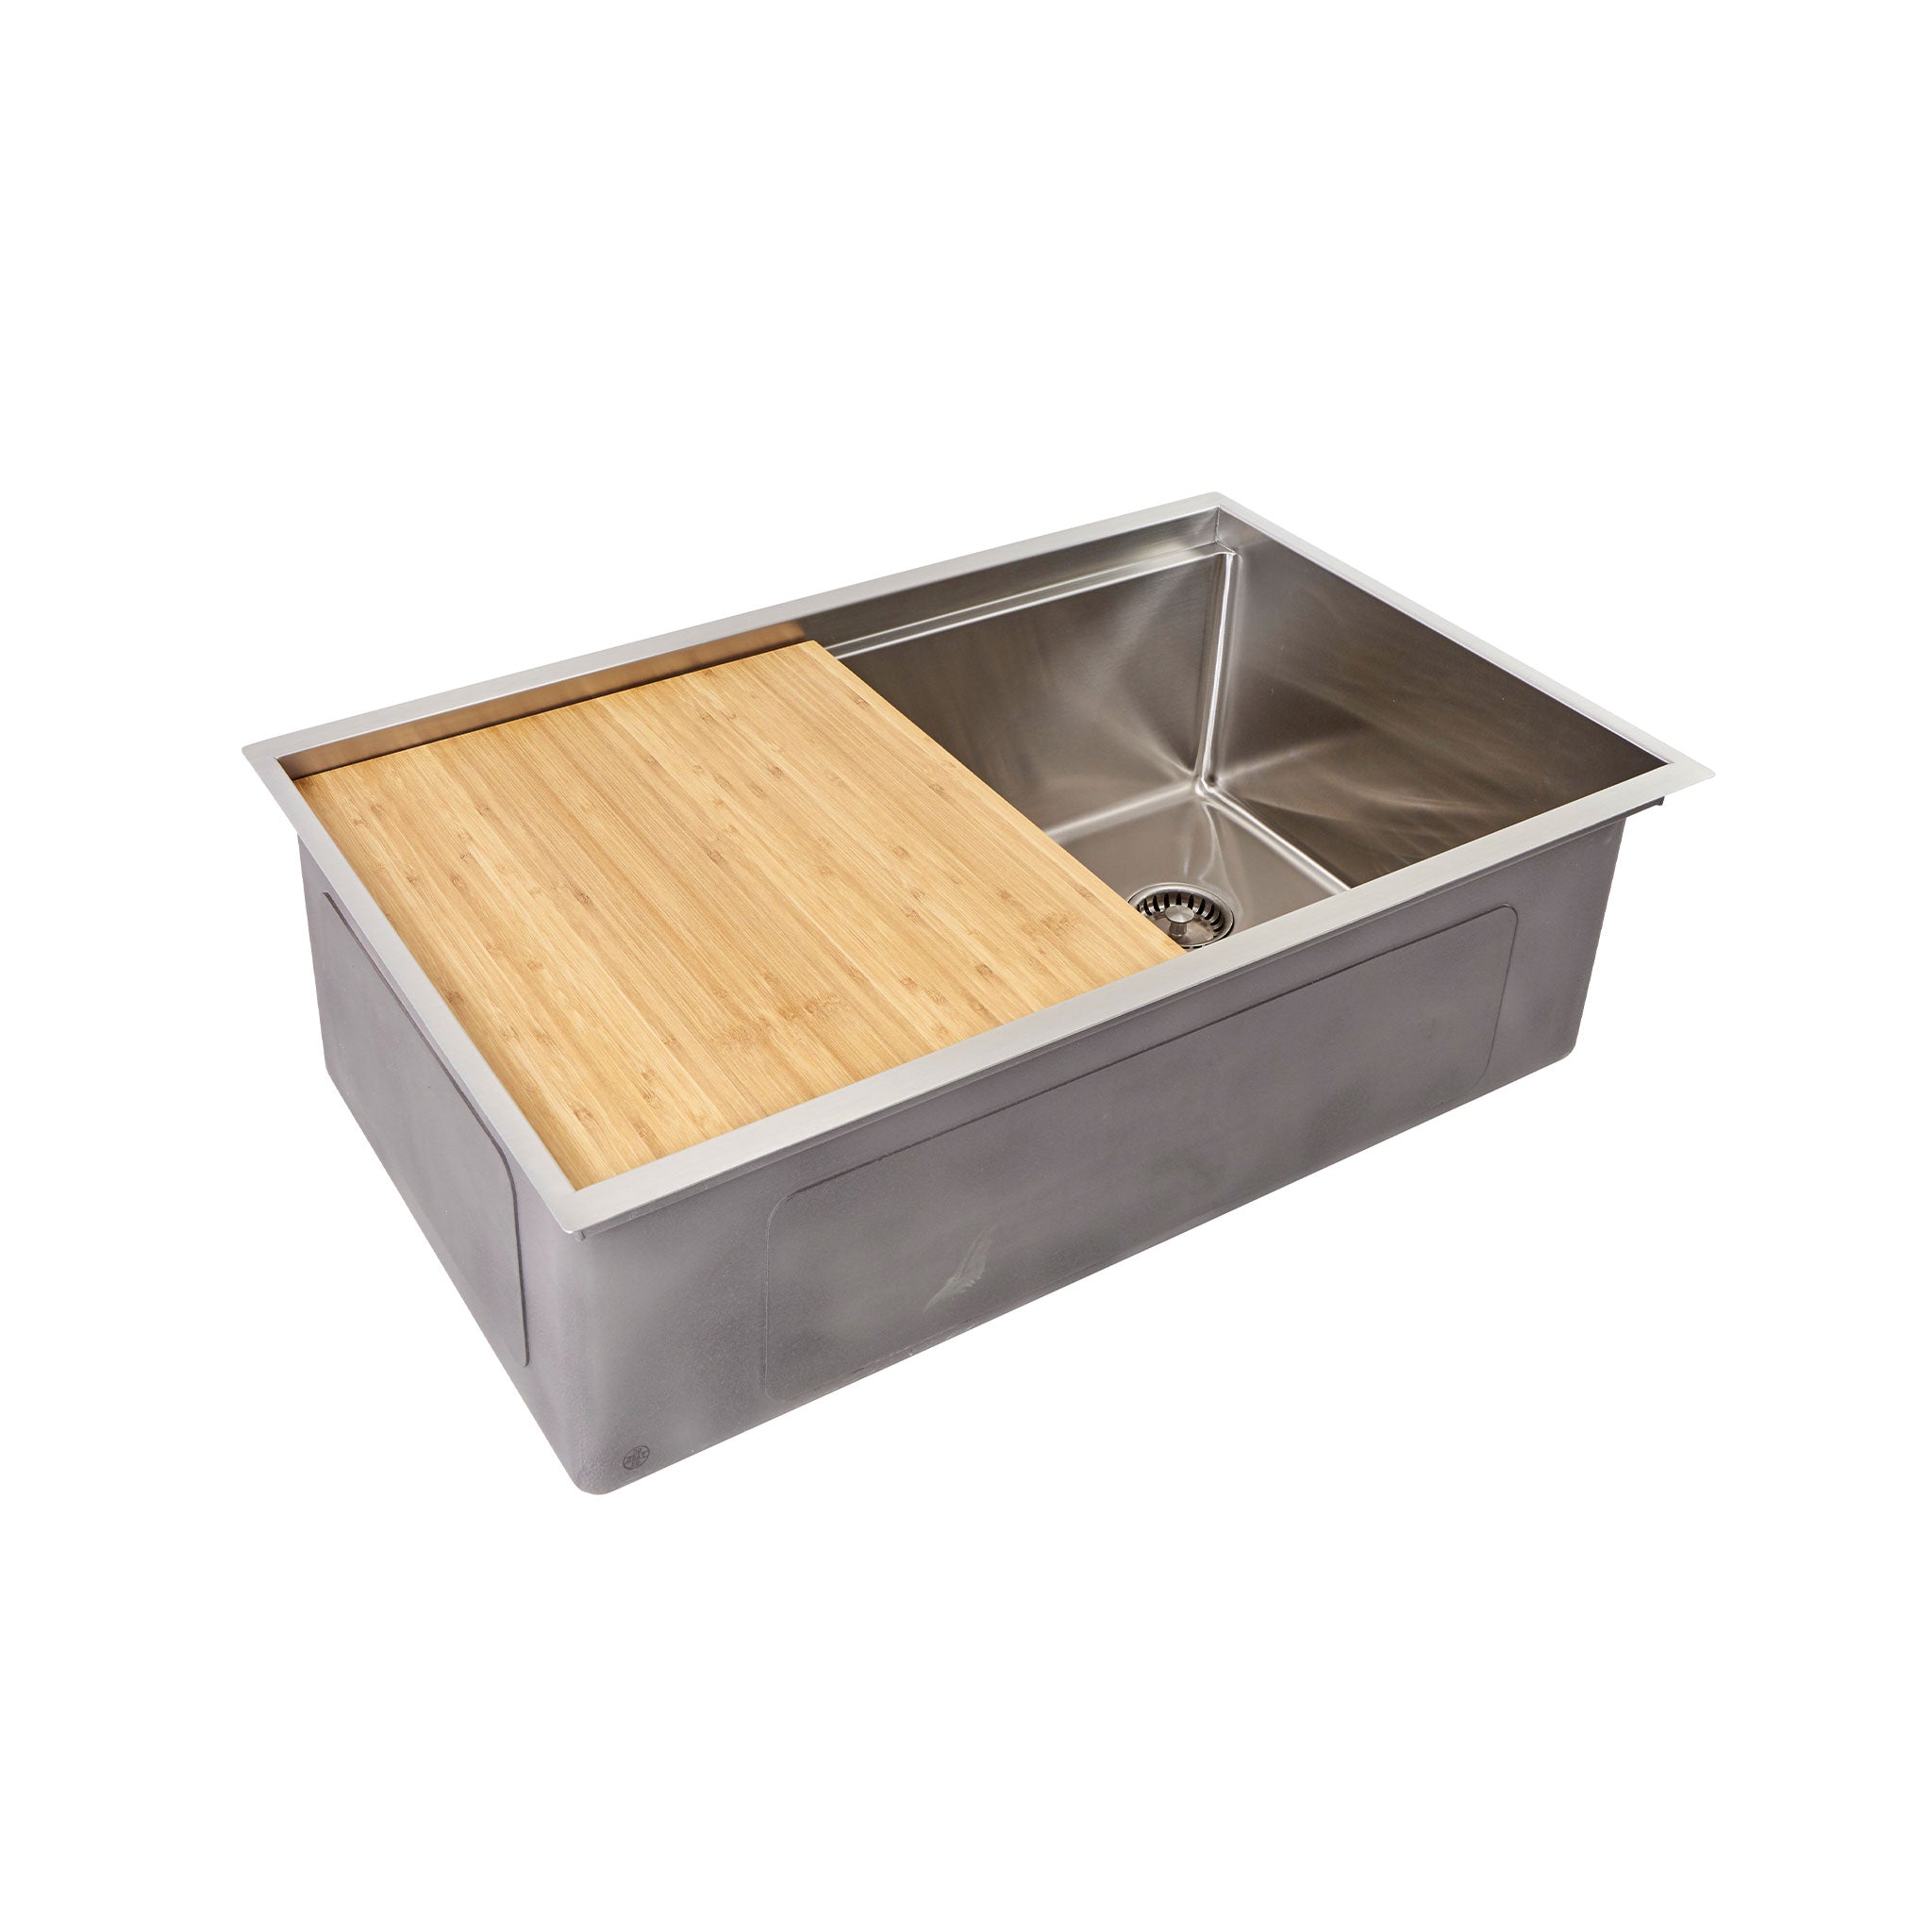 Bamboo cutting board in a 31” kitchen sink from Create Good Sinks with a right, offset seamless drain.